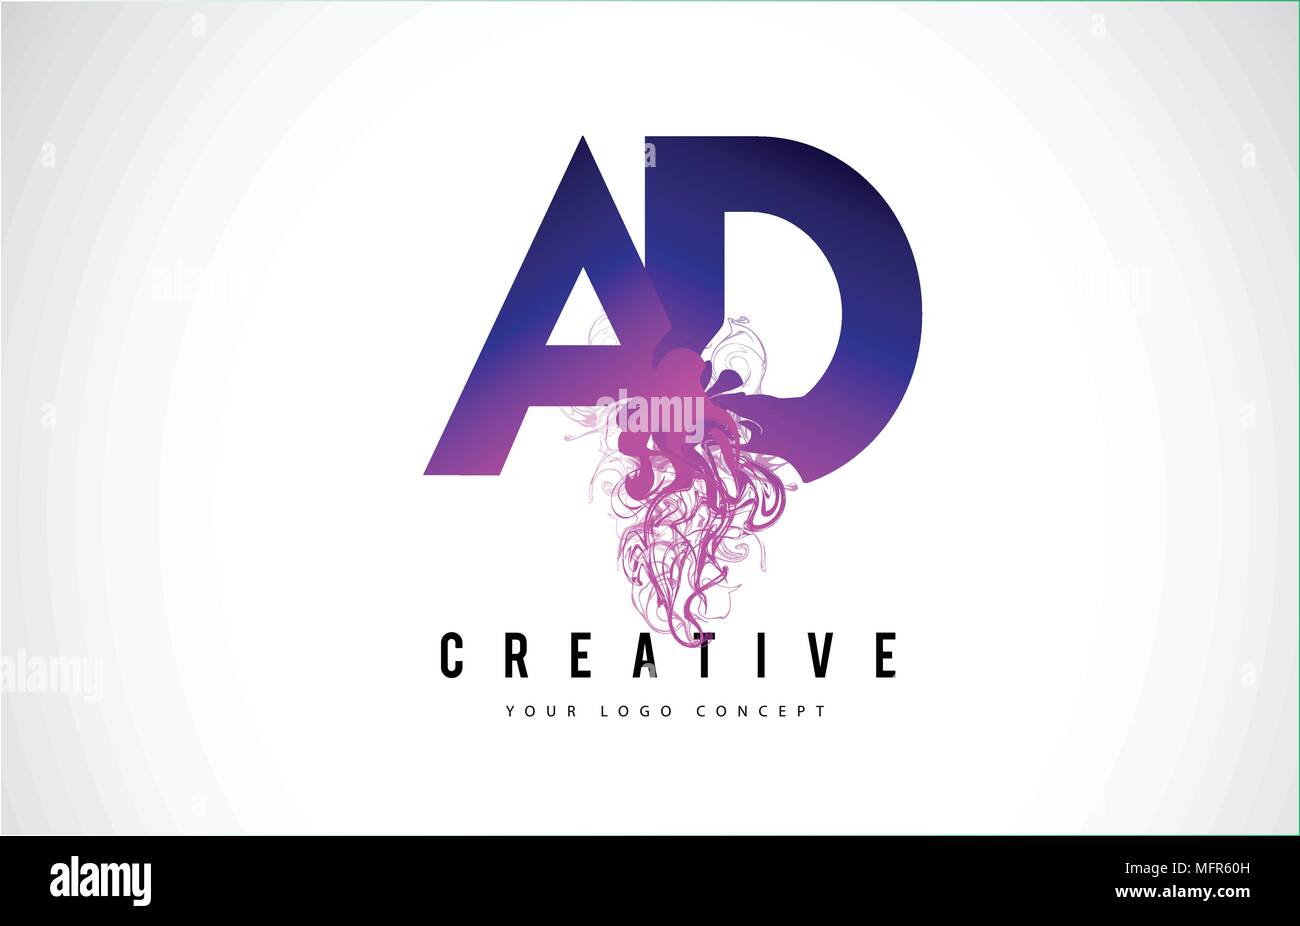 Ad Logo High Resolution Stock Photography And Images Alamy